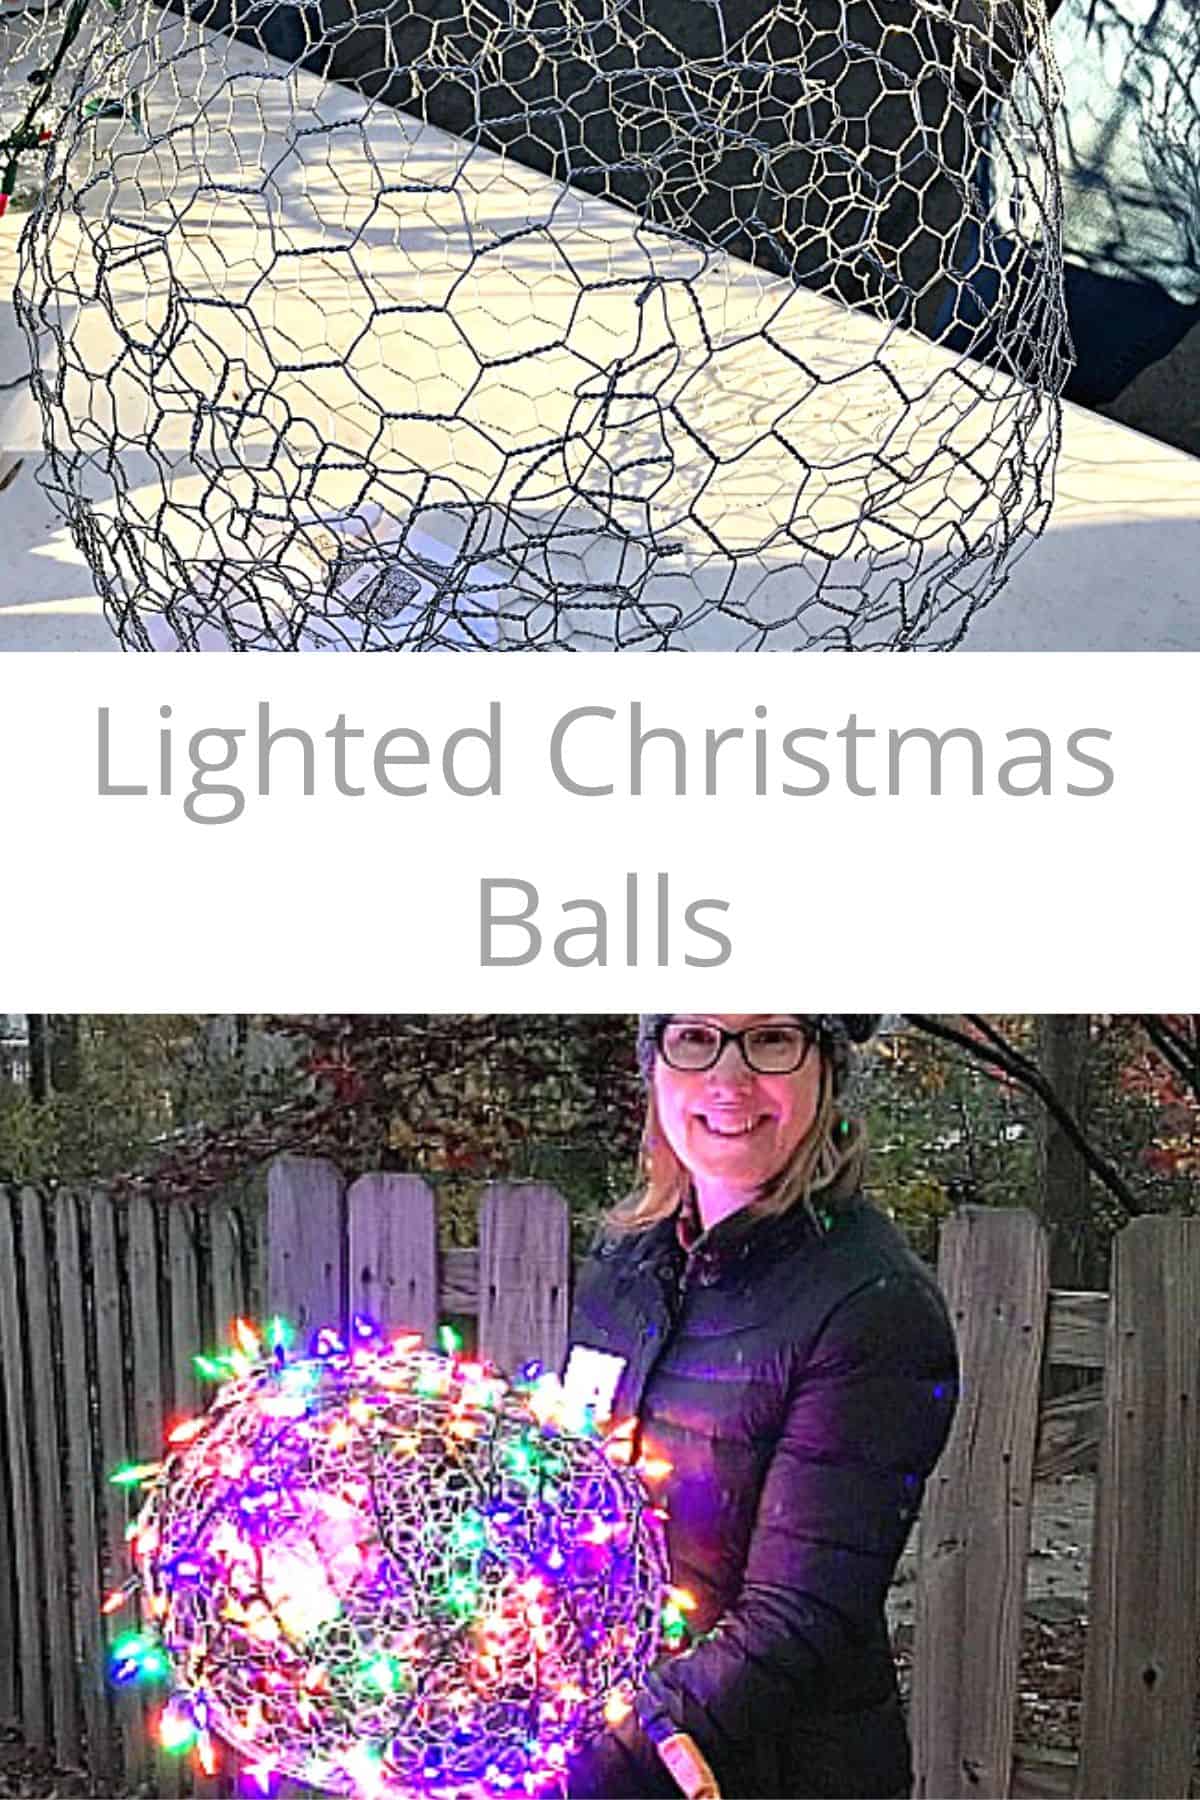 chicken wire ball and finished lighted Christmas ball